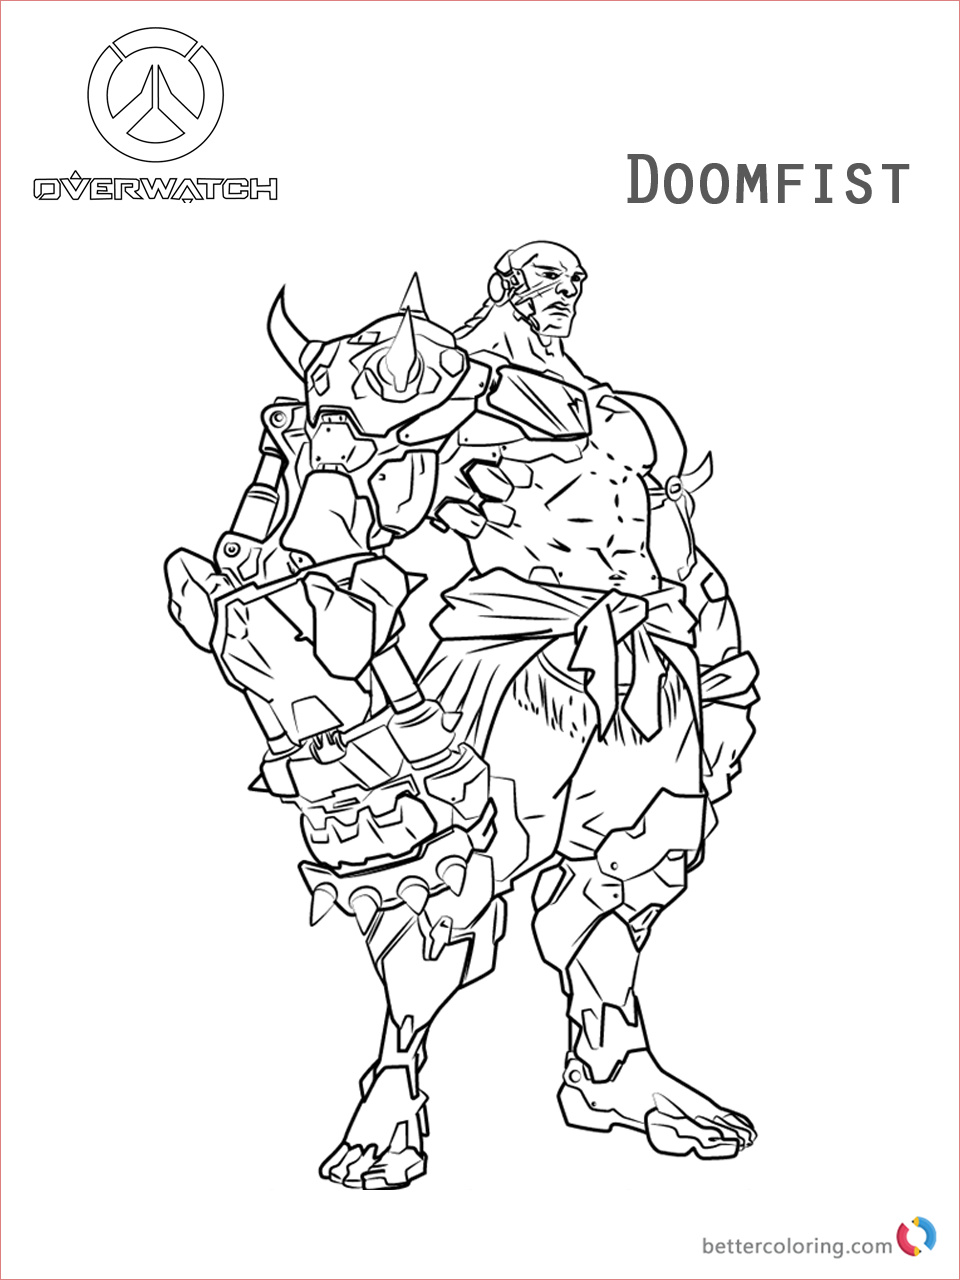 doomfist from overwatch coloring pages